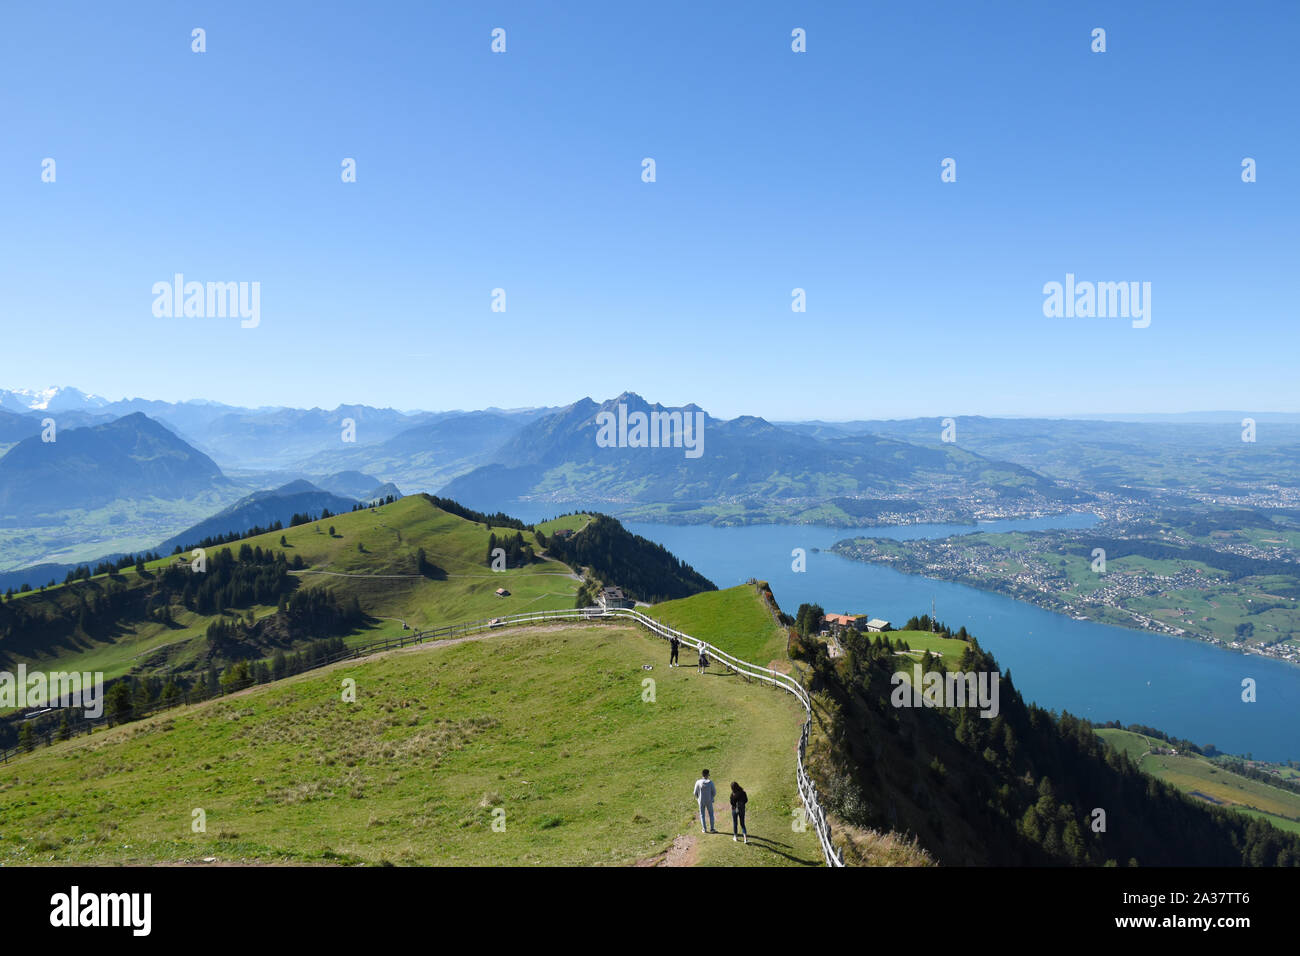 Panoramic landscape view of meadows, mountain ranges with snowy mountain peaks from the top of Rigi Kulm, Mount Rigi in Switzerland with Lake Lucerne Stock Photo